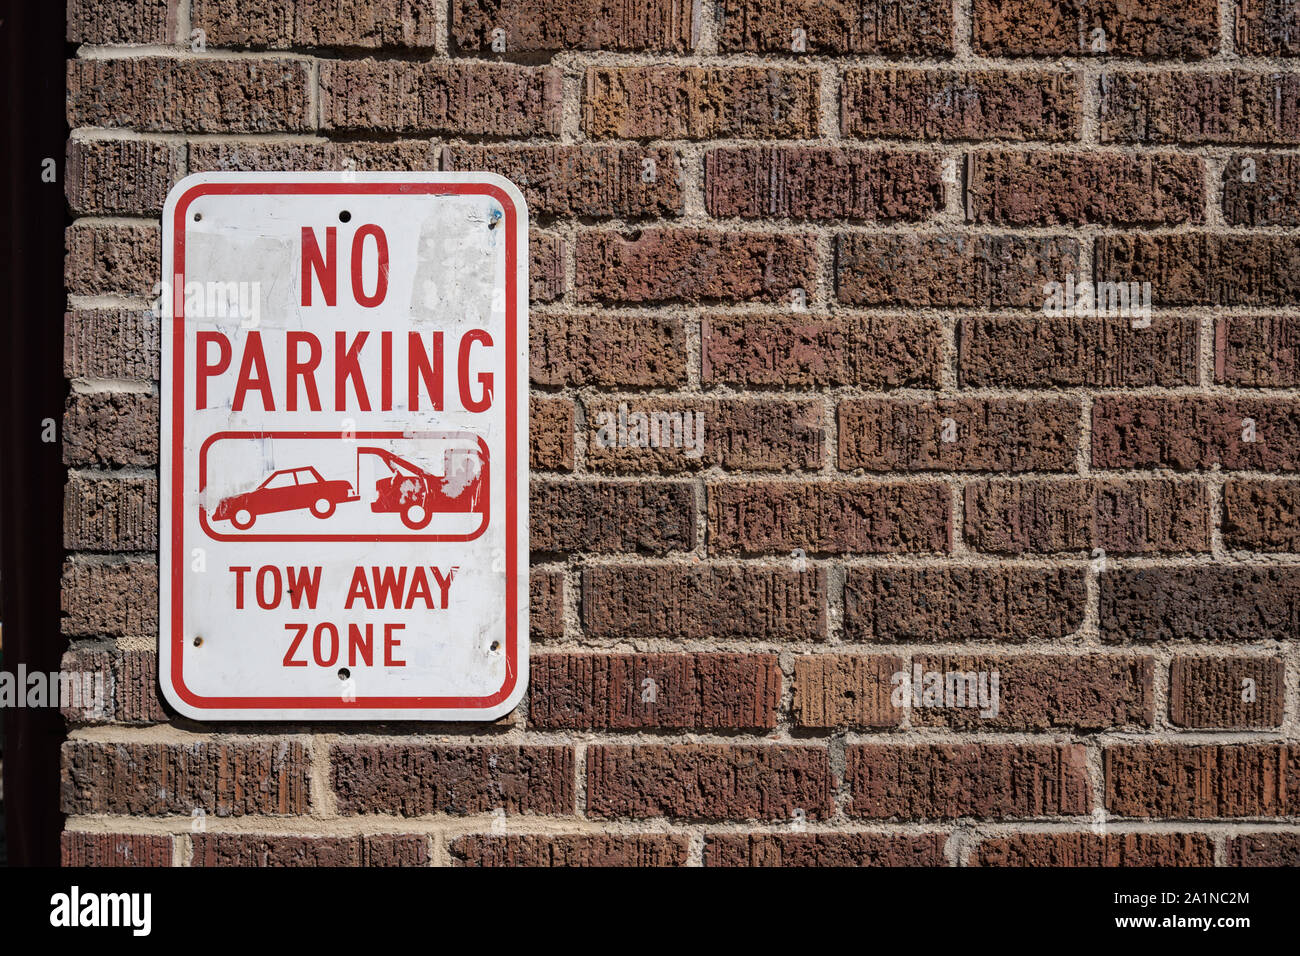 No Parking Sign on a Brick Wall. Tow away zone Stock Photo